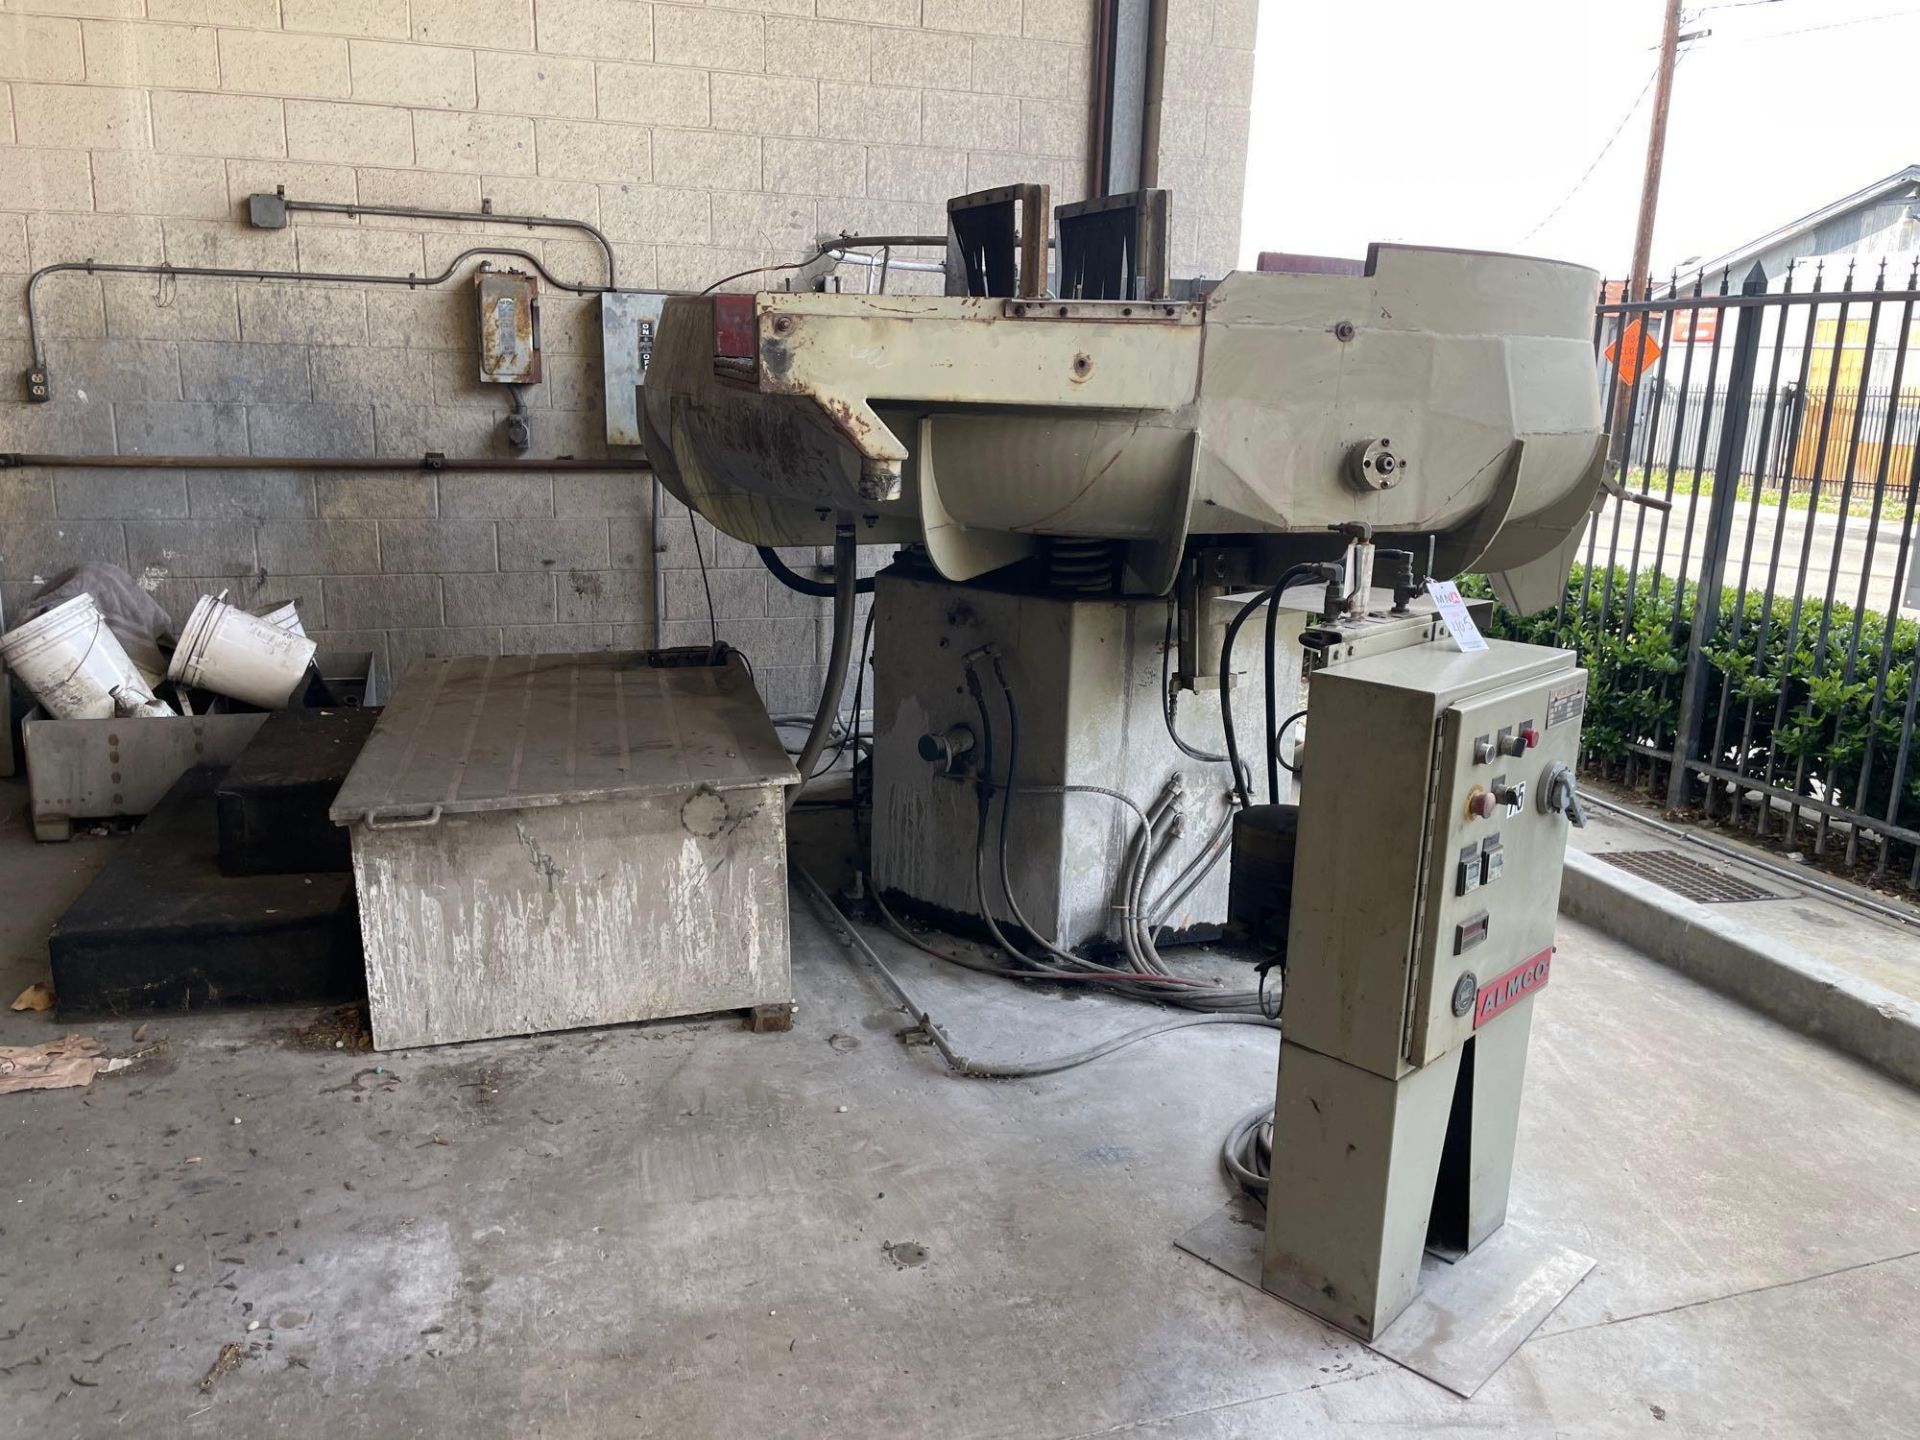 Almco OR-25VLR Vibratory Finisher, s/n 115802 - Image 3 of 10